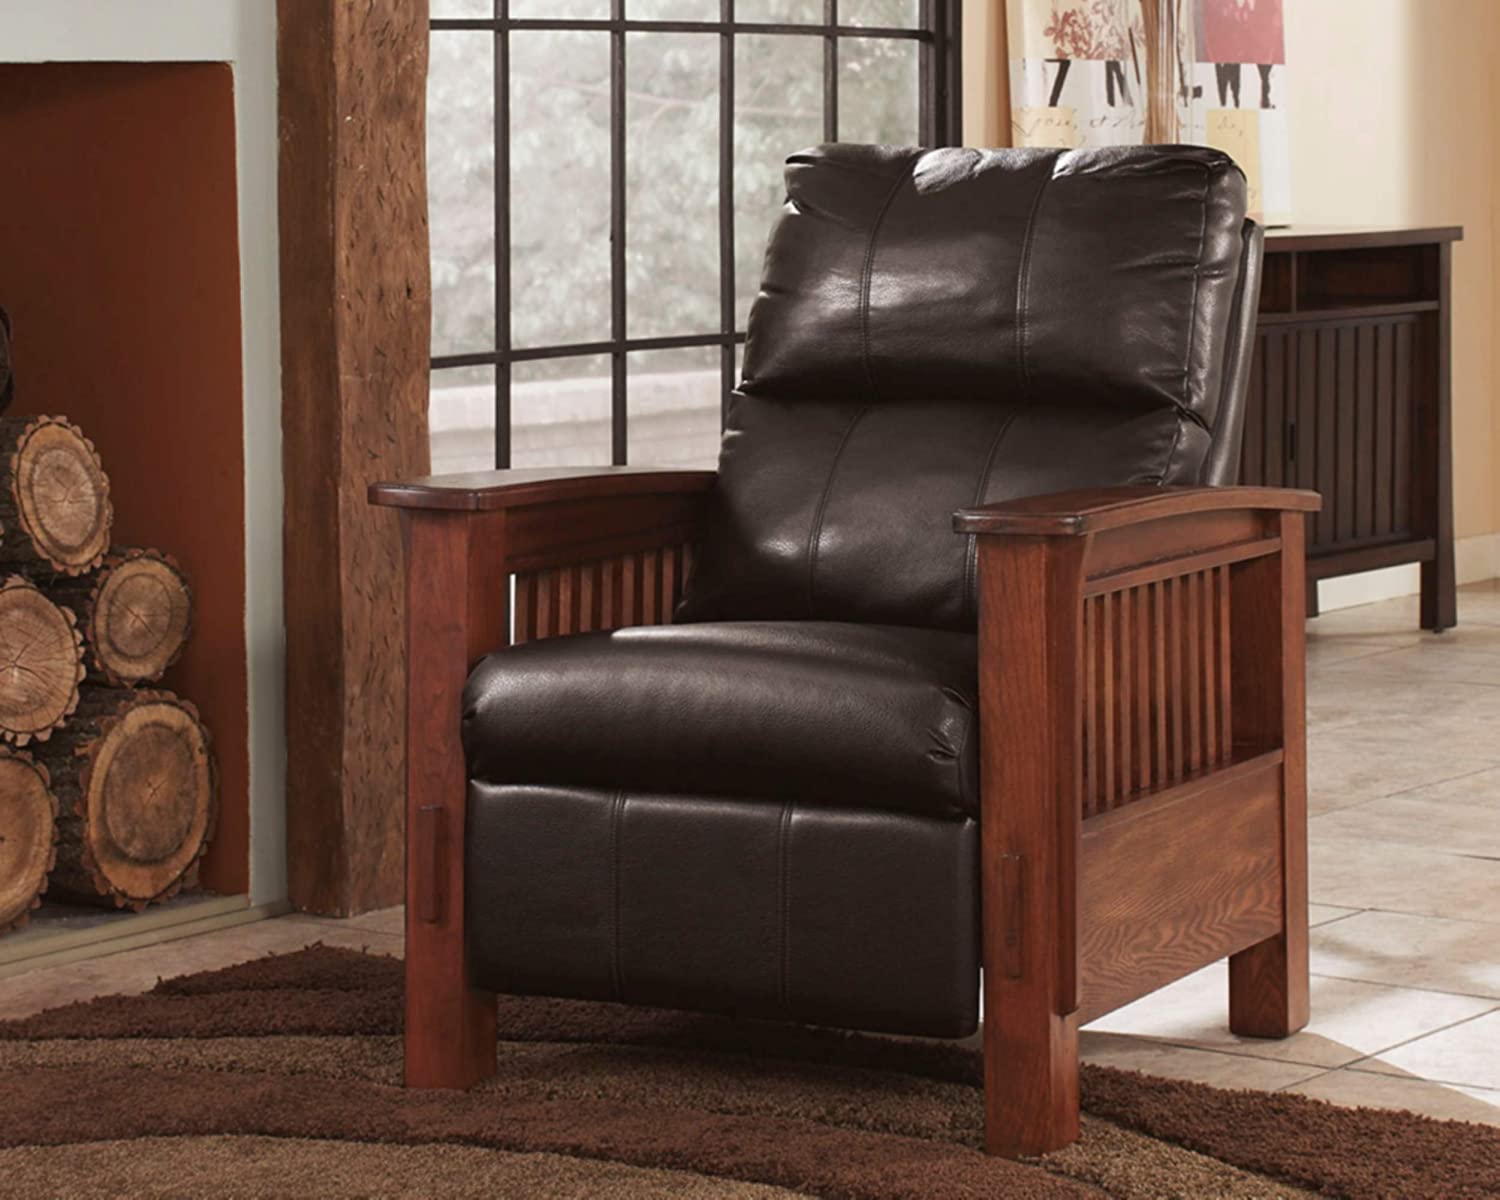 5 Best Mission Style Recliners Jul 2021 Which One To Buy